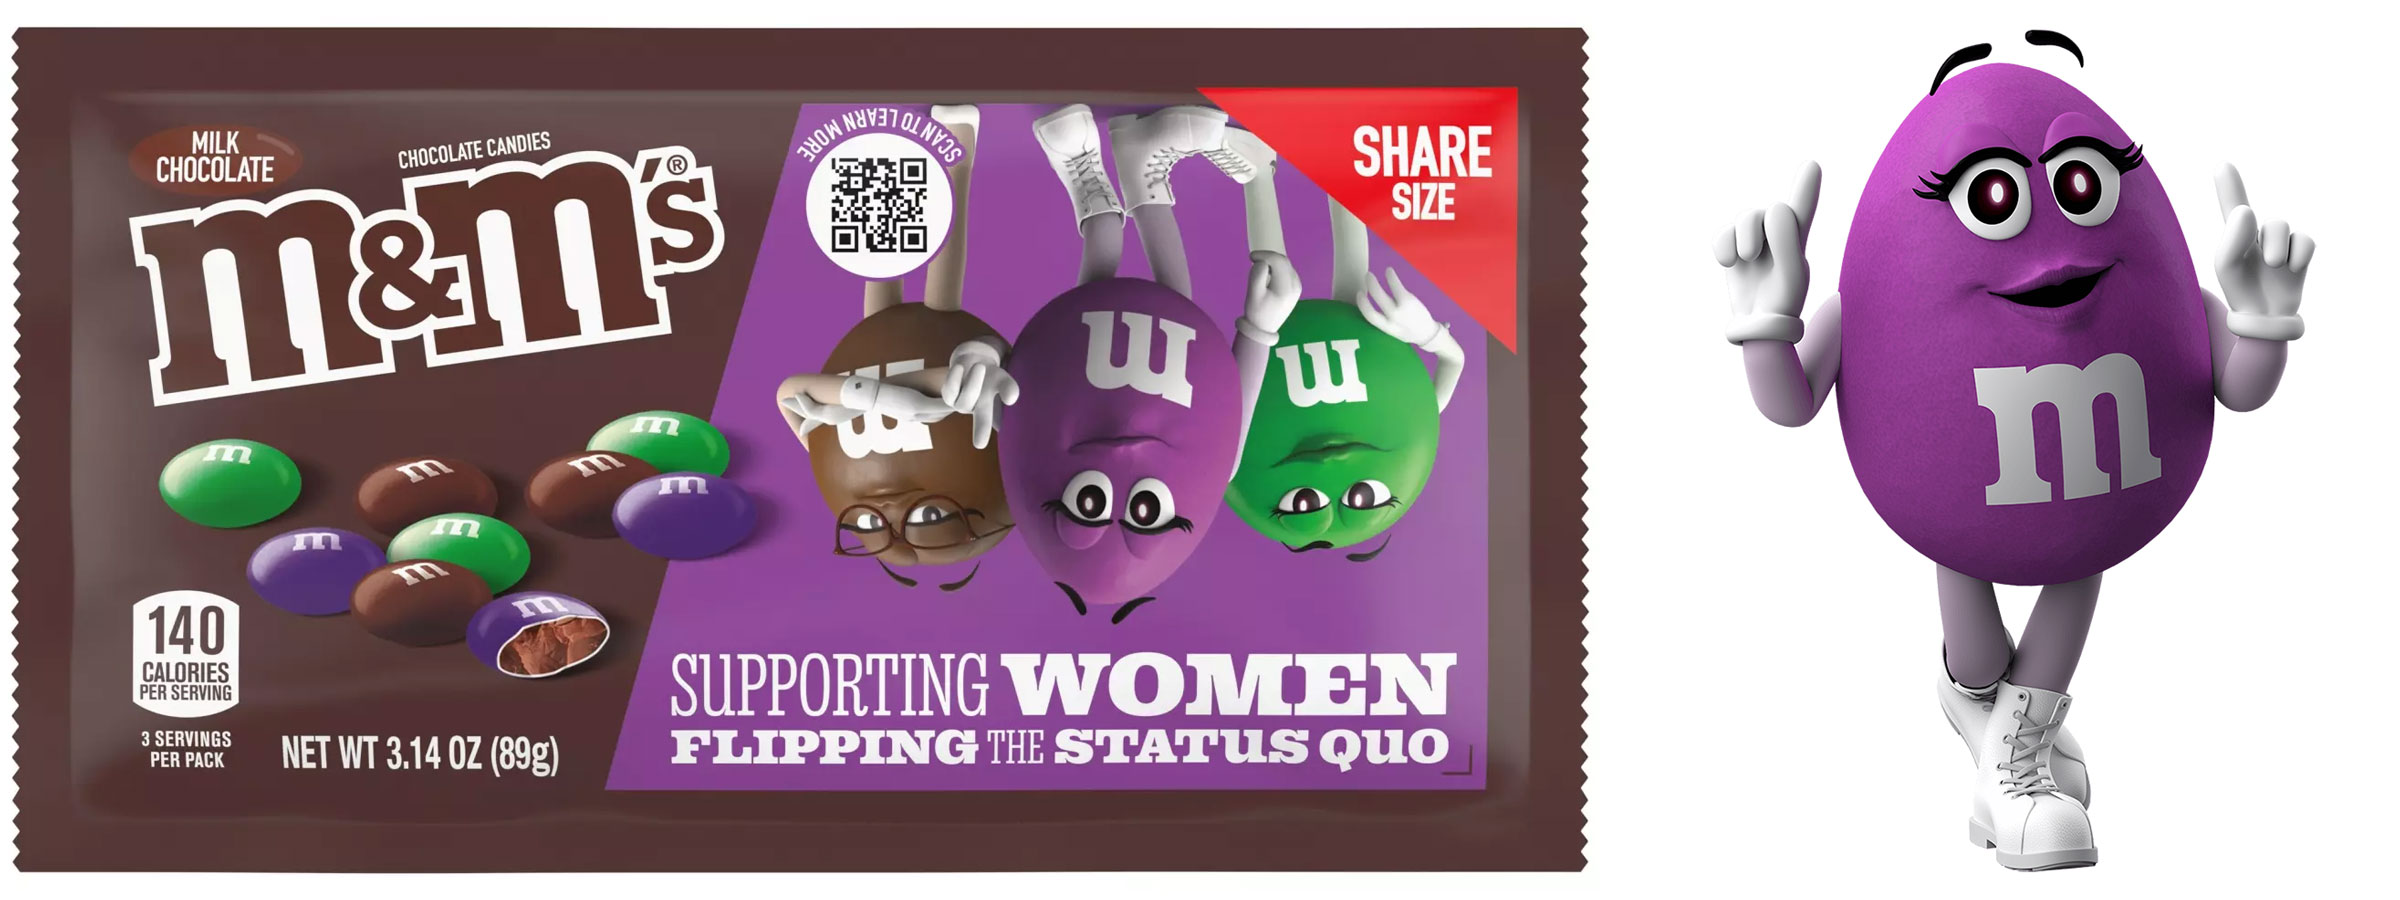 M&Ms introduces first new character in more than a decade: Purple